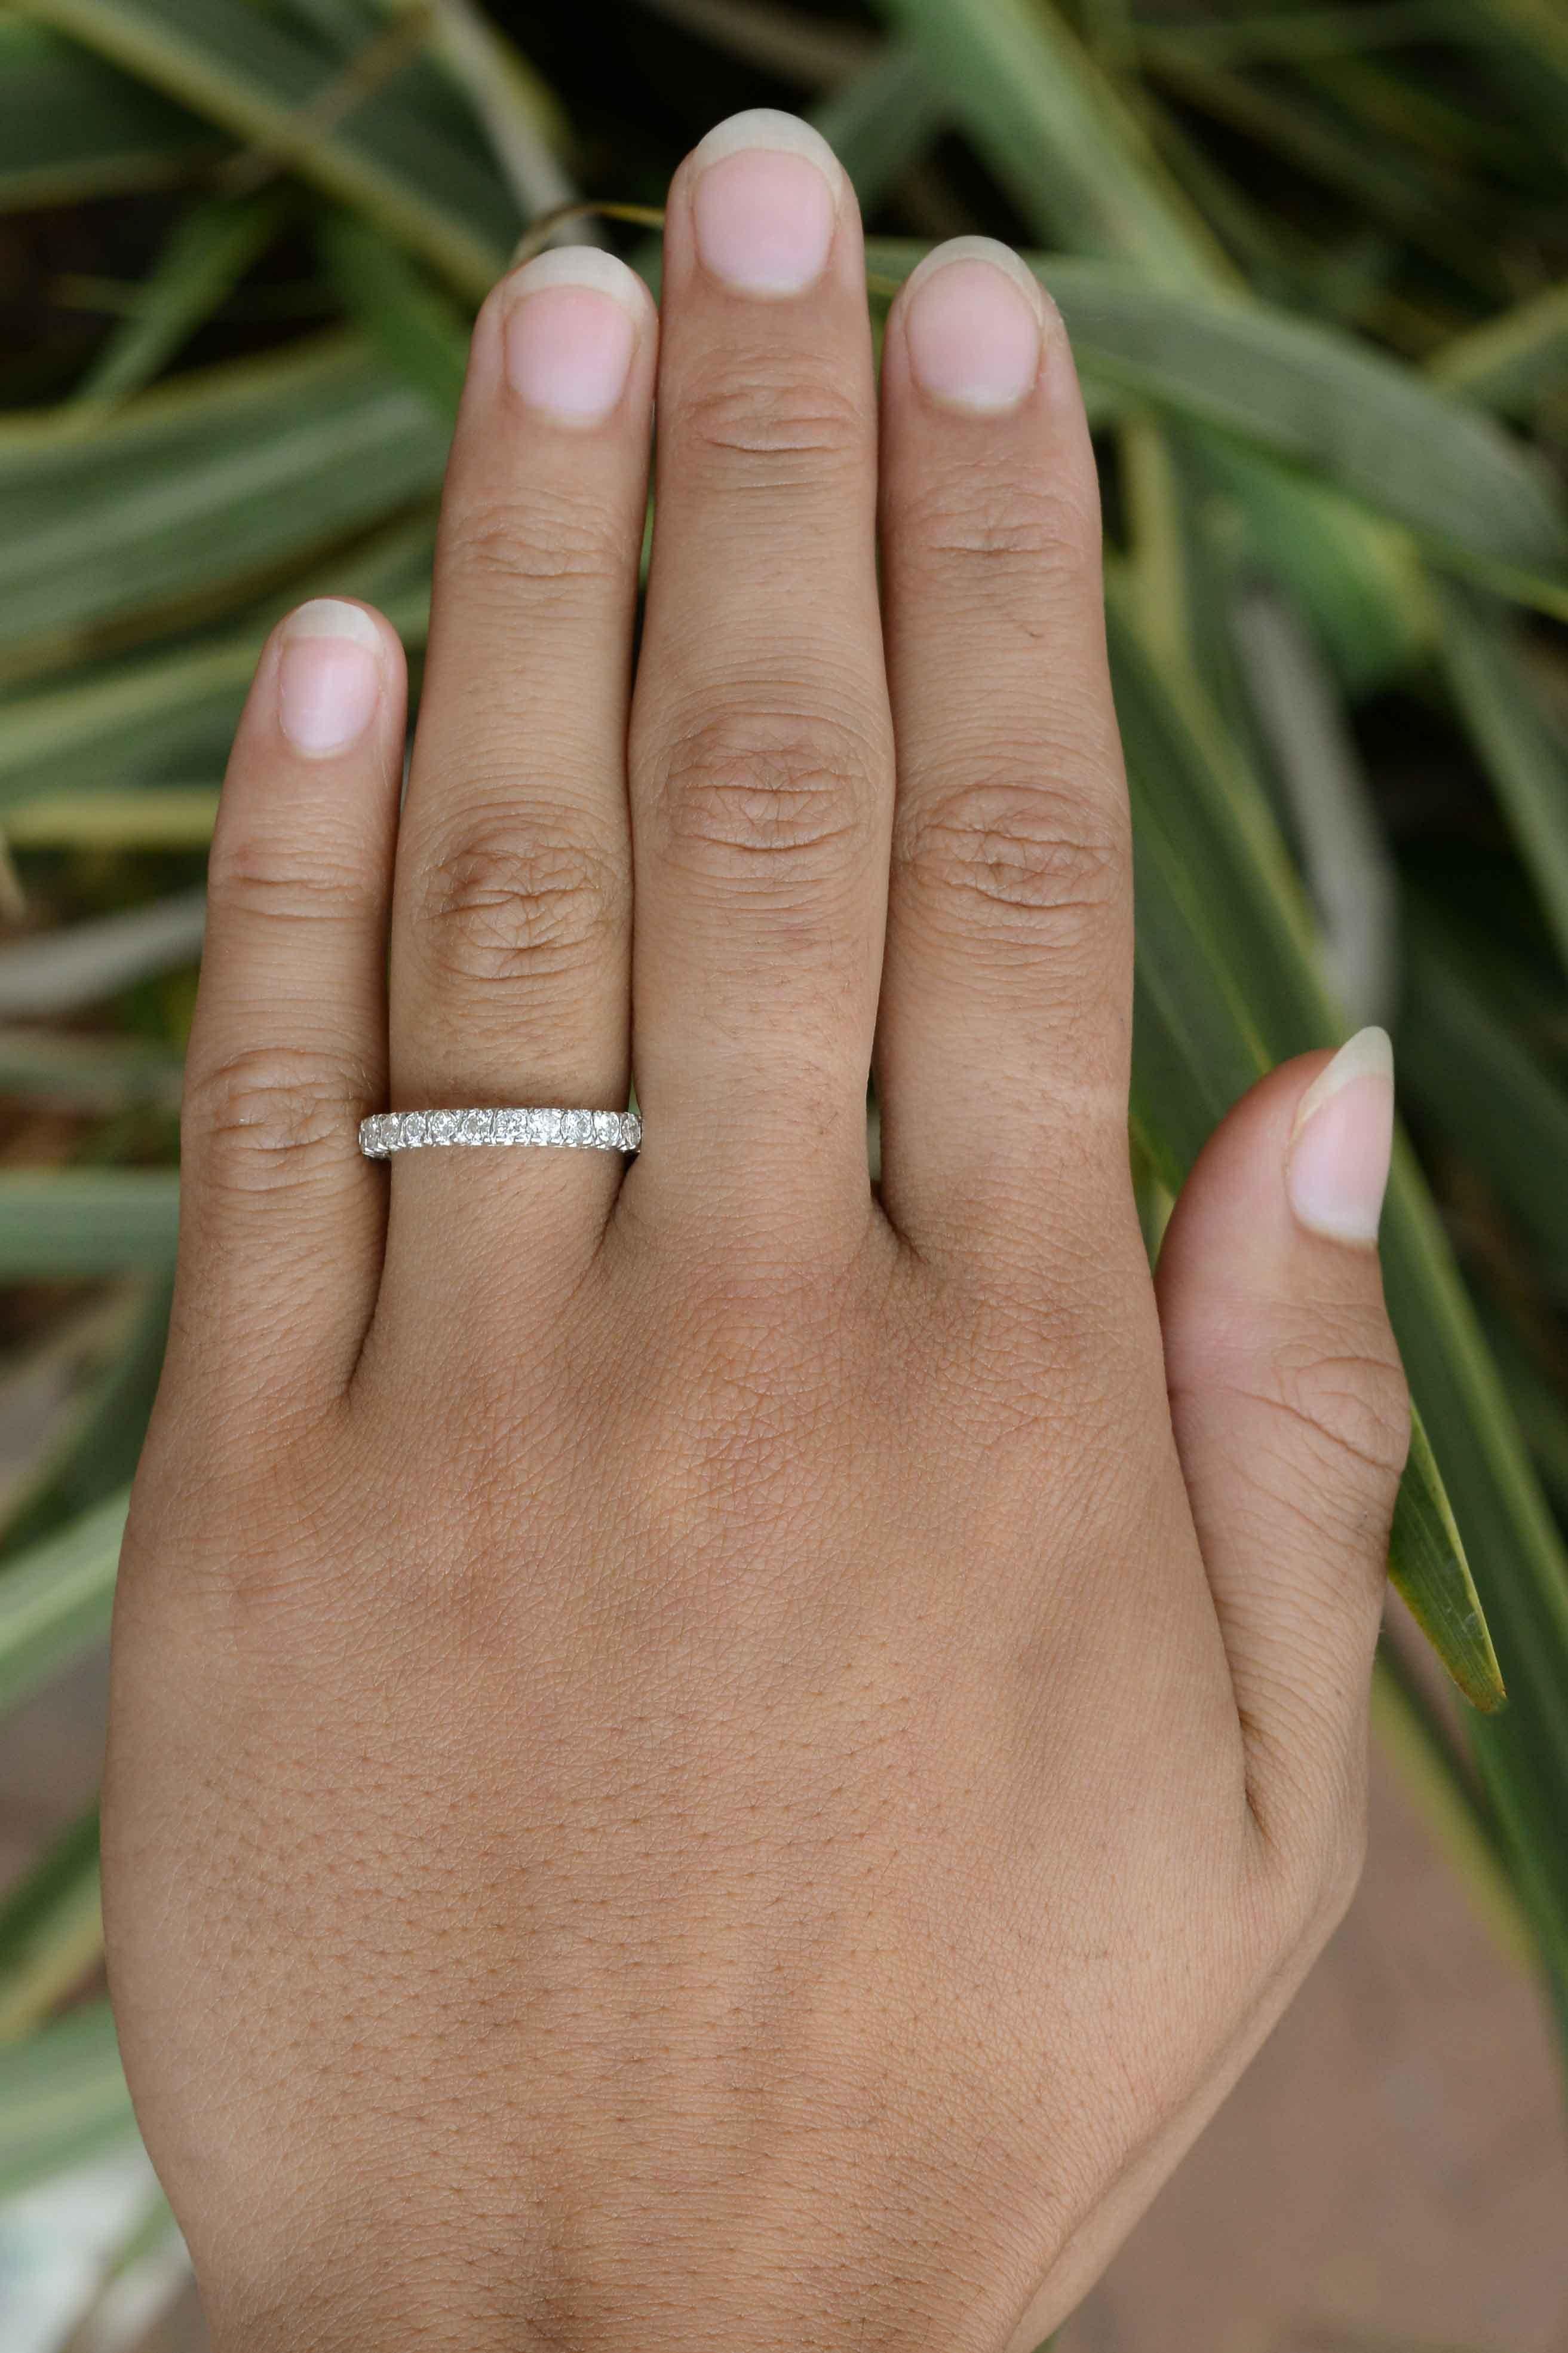 A stunning, vintage 1 carat diamond eternity band. This estate wedding band is set with 24 white diamonds of exceptional clarity and brilliance that completely encircle this bridal jewel. The low, prong setting is quite comfortable and can be worn